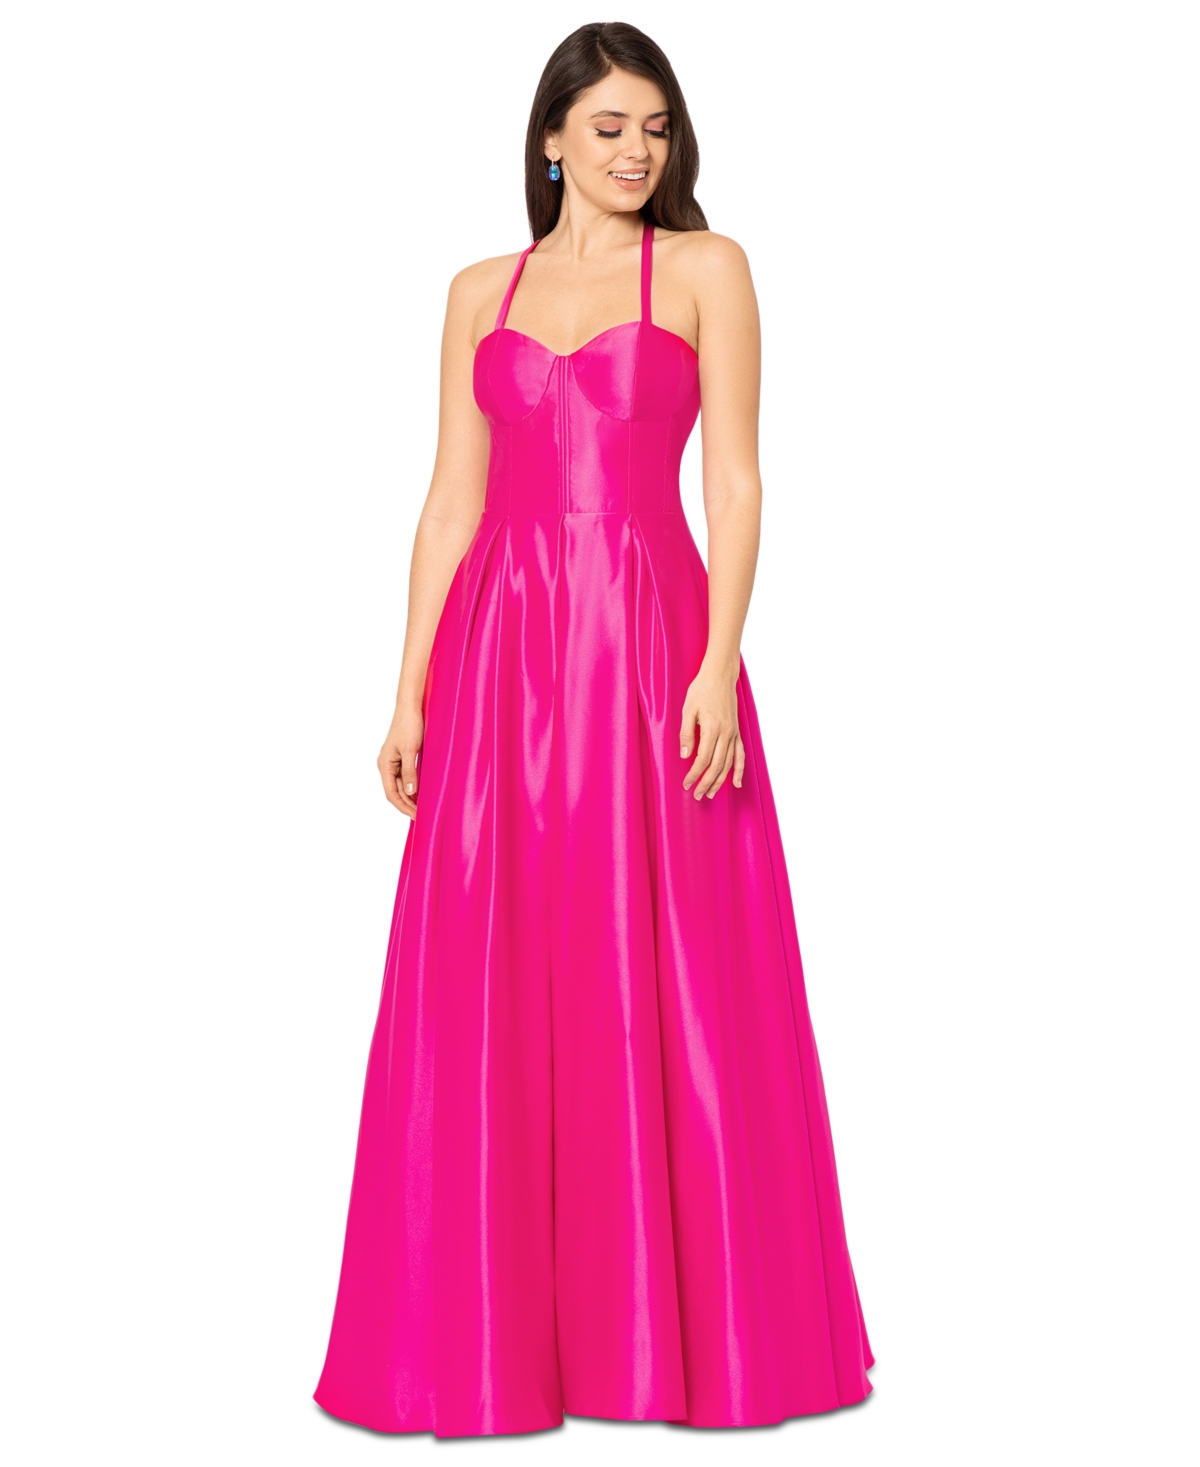 Blondie Nites Juniors' Corset-Bodice Ball Gown, Created for Macy's